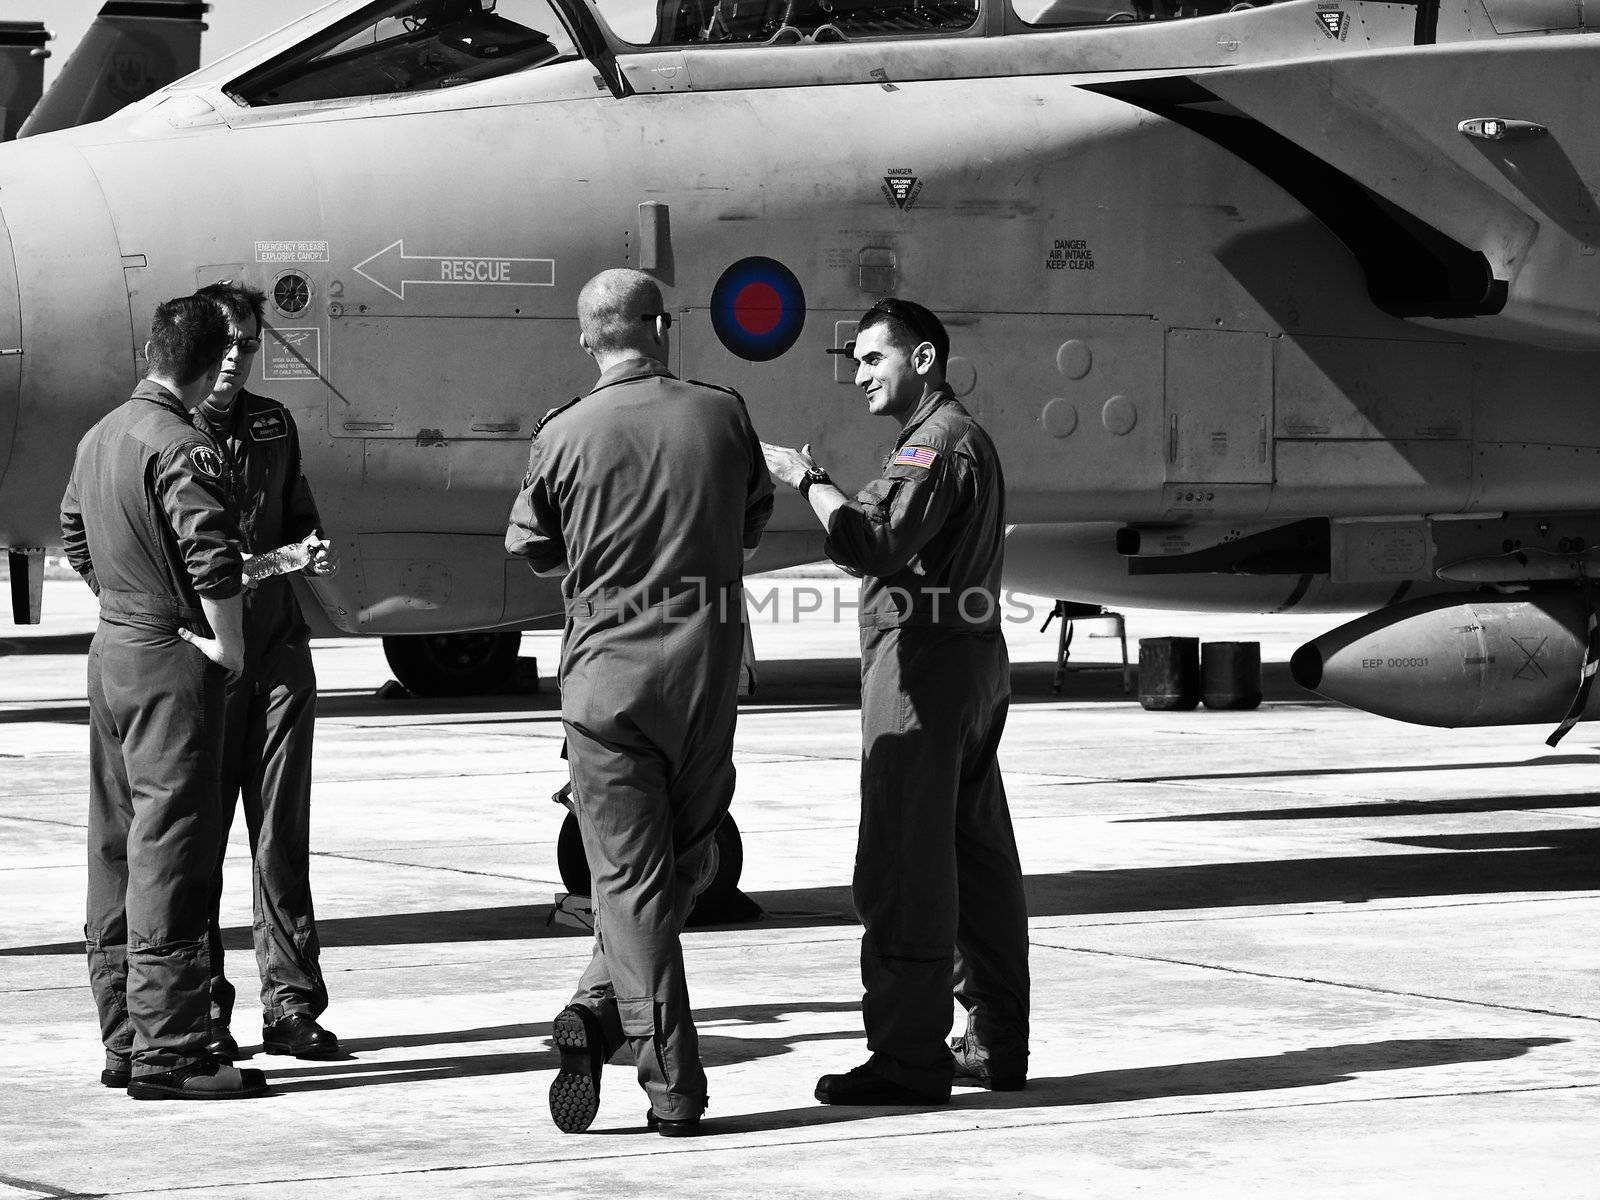 LUQA, MALTA - SEP 26 - Jet fighter pilots having a chat during the Malta International Airshow 26th September 2009